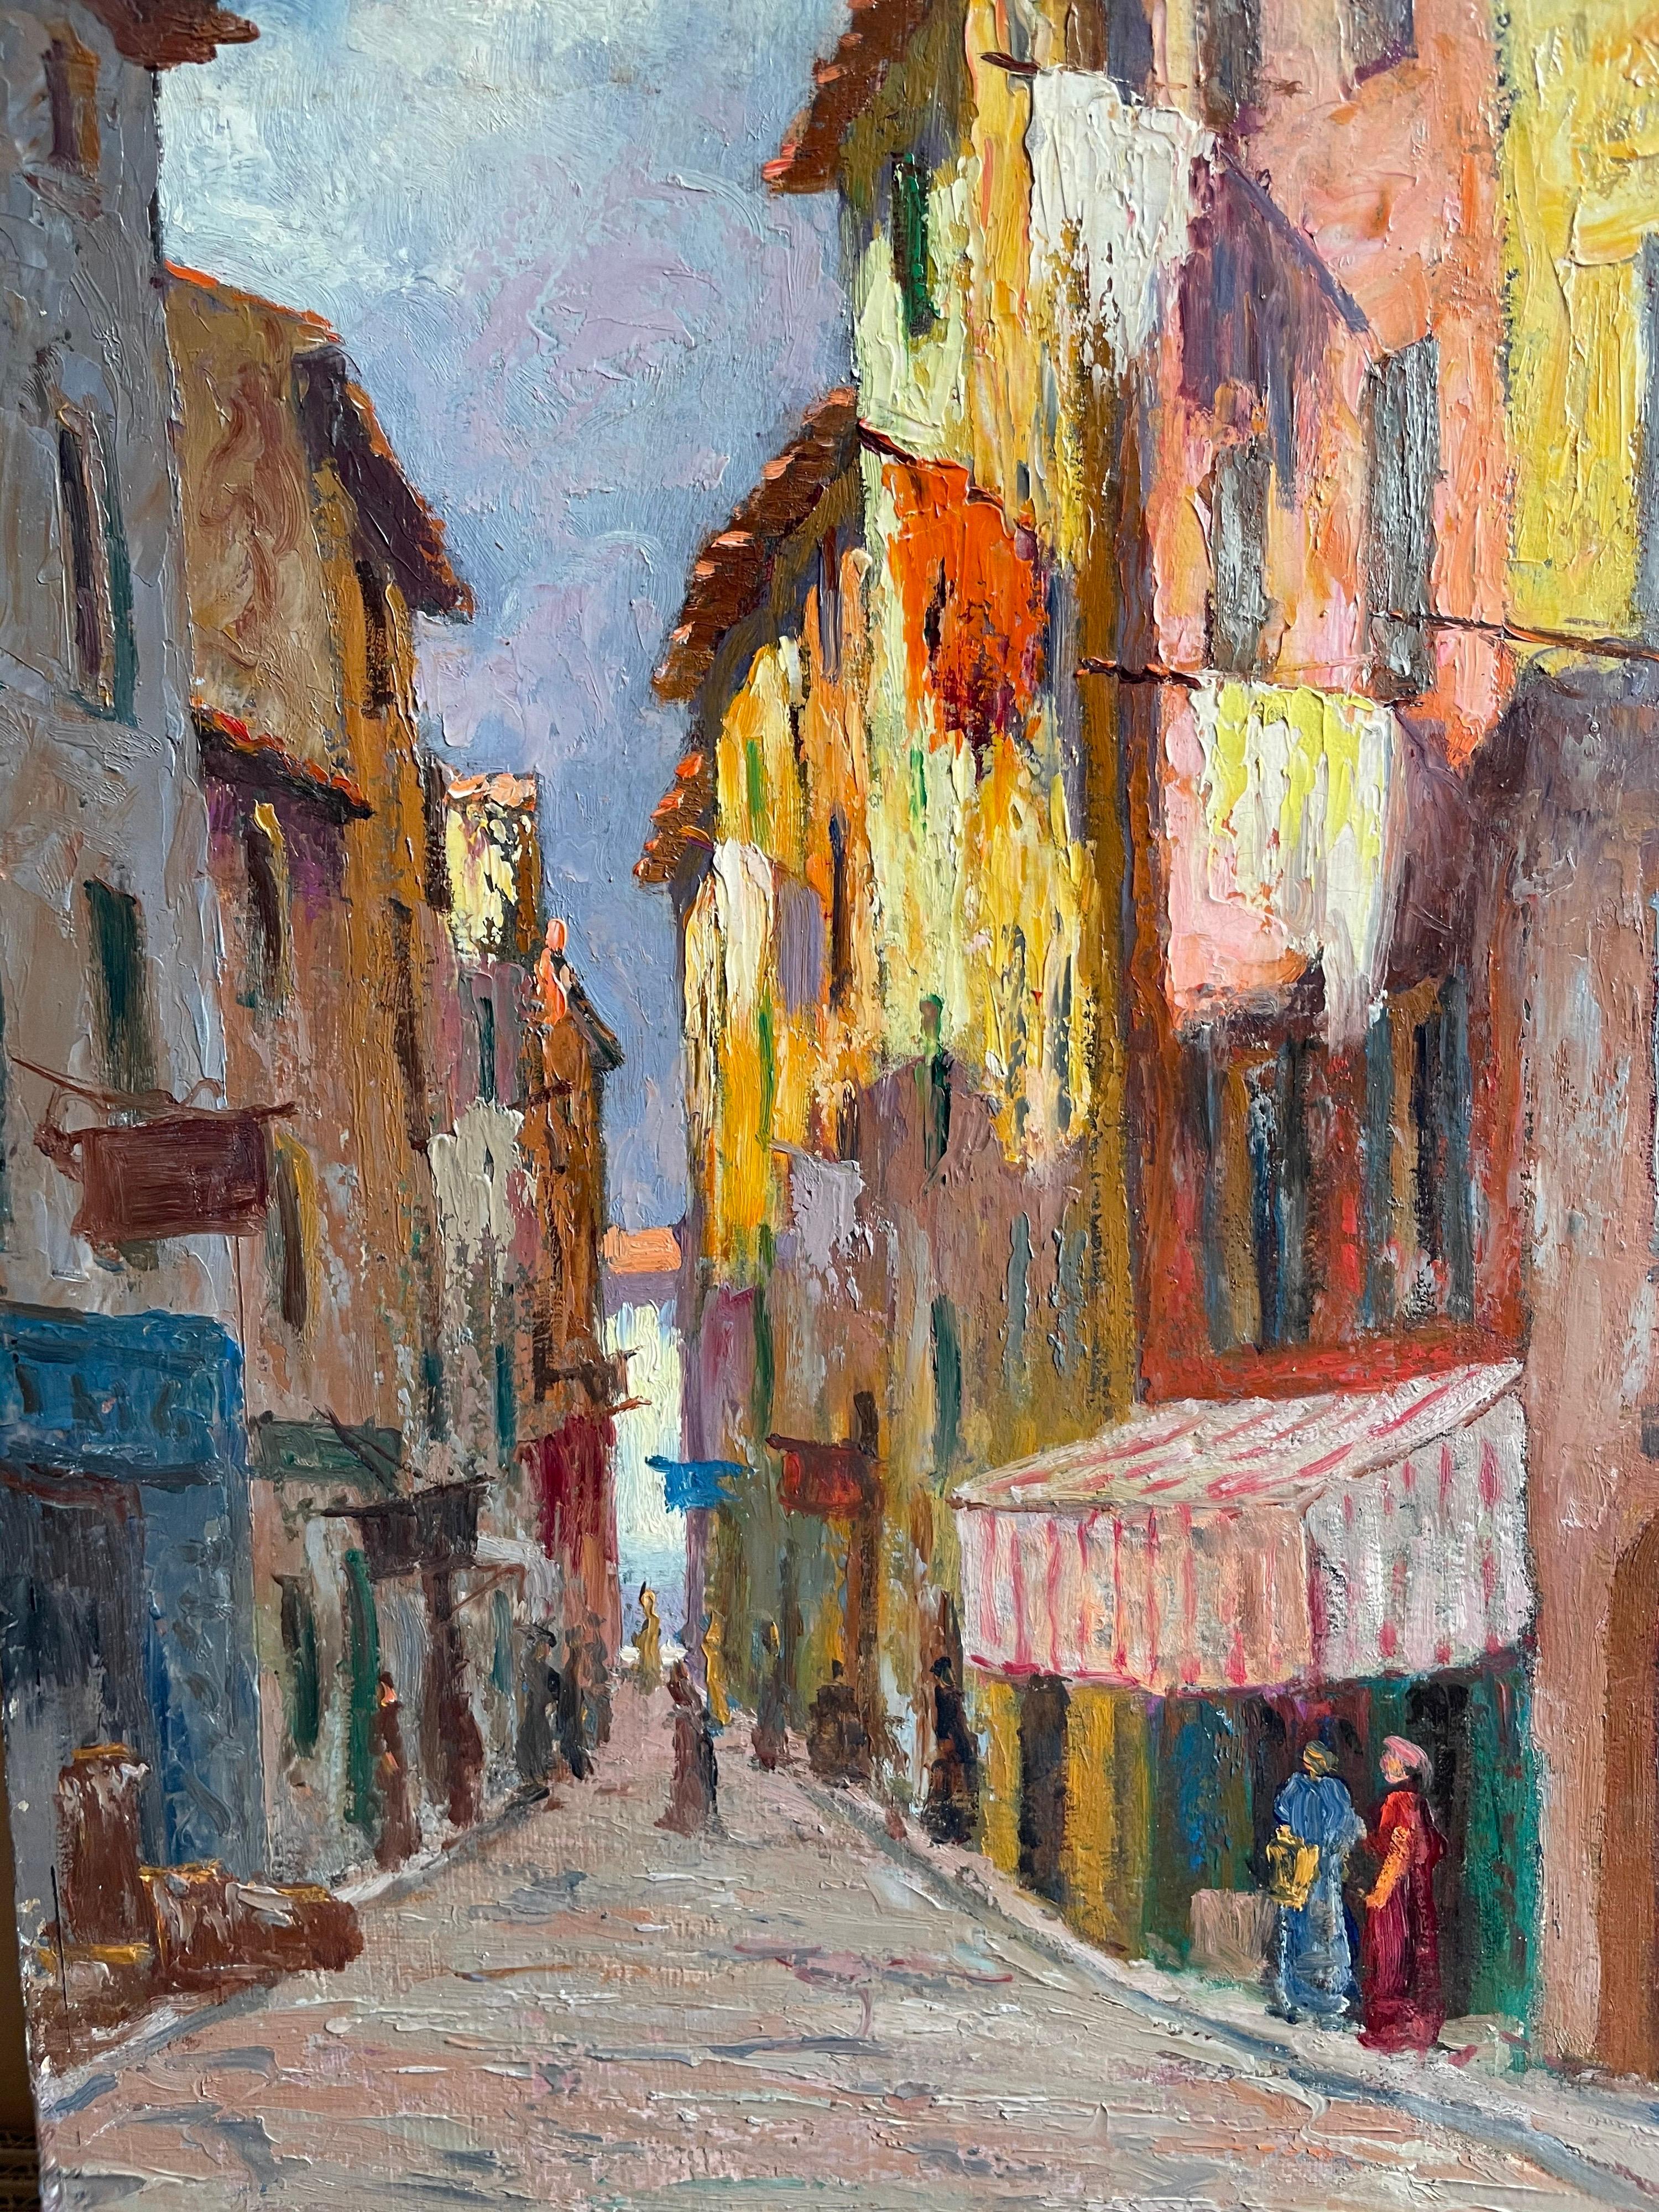 Artist/ School: Alfred Quertant, French circa 1930's, signed lower right

Title: The Old Town, Nice

Medium: oil on panel, unframed

Size: painting: 46cm x 33cm

Provenance: from a private collection in France.

Condition: the painting is in overall